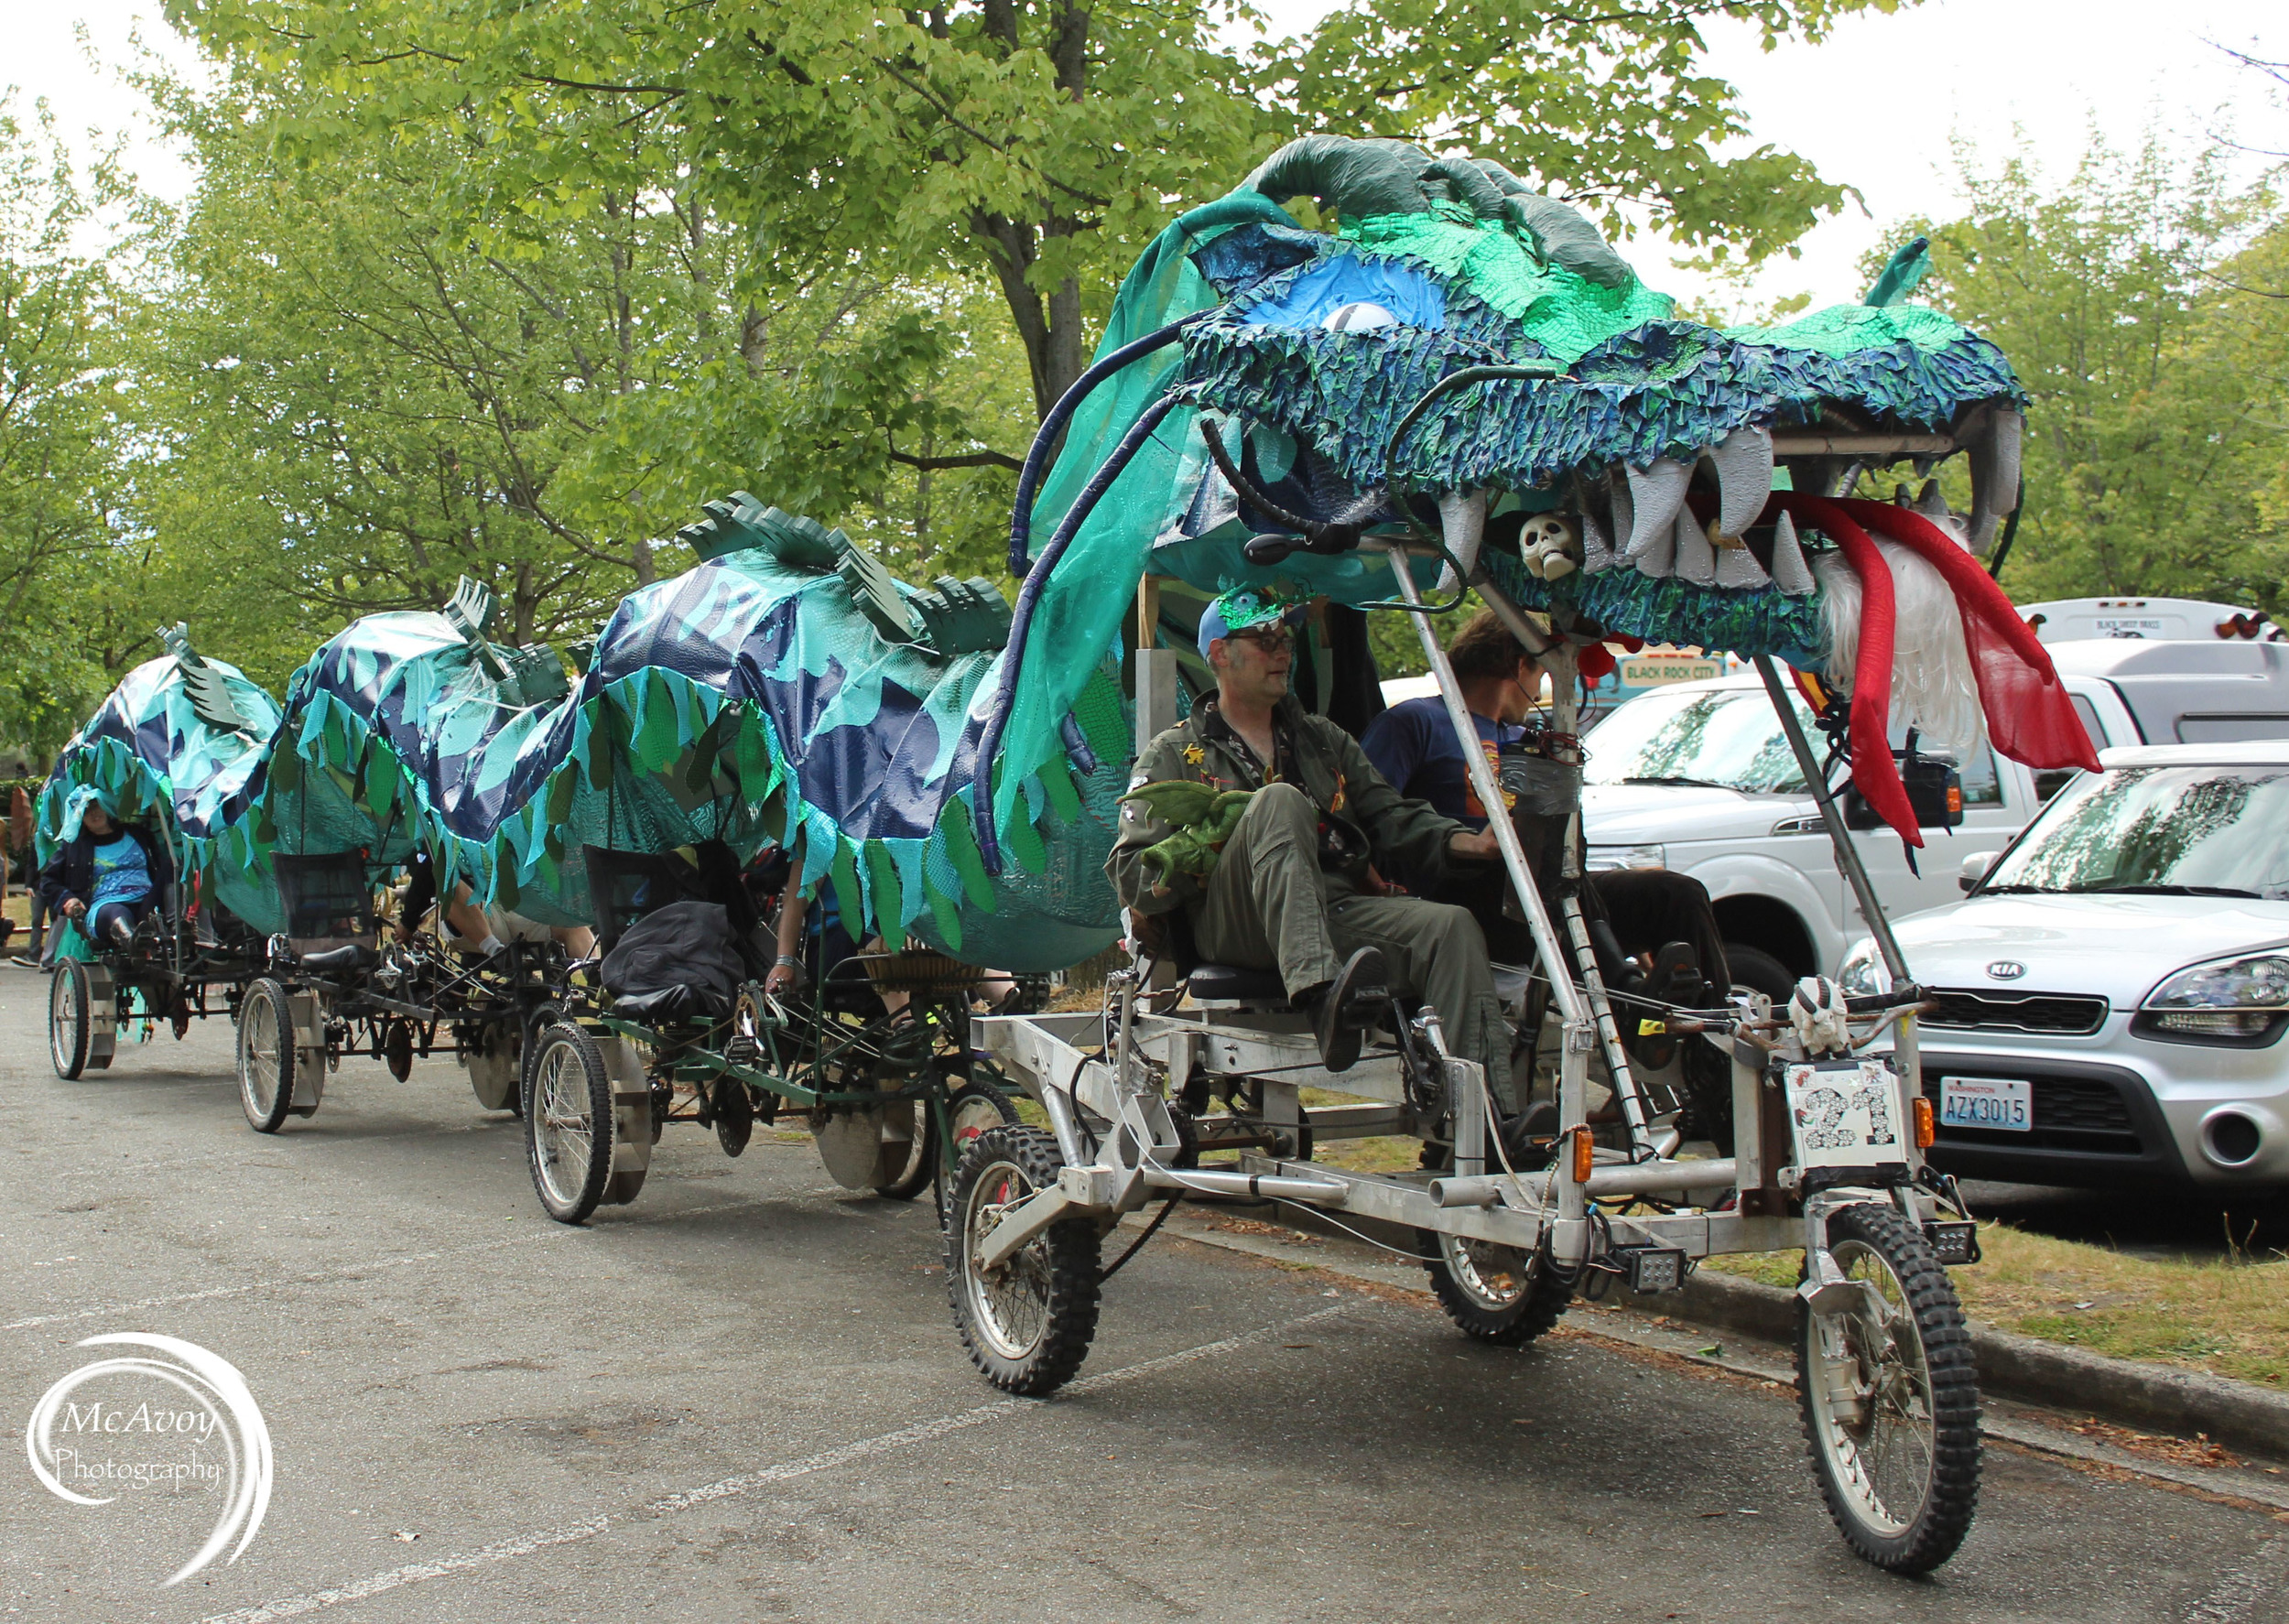  The Fremont Solstice parade has a long tradition of no logos, words or motorized vehicles. 